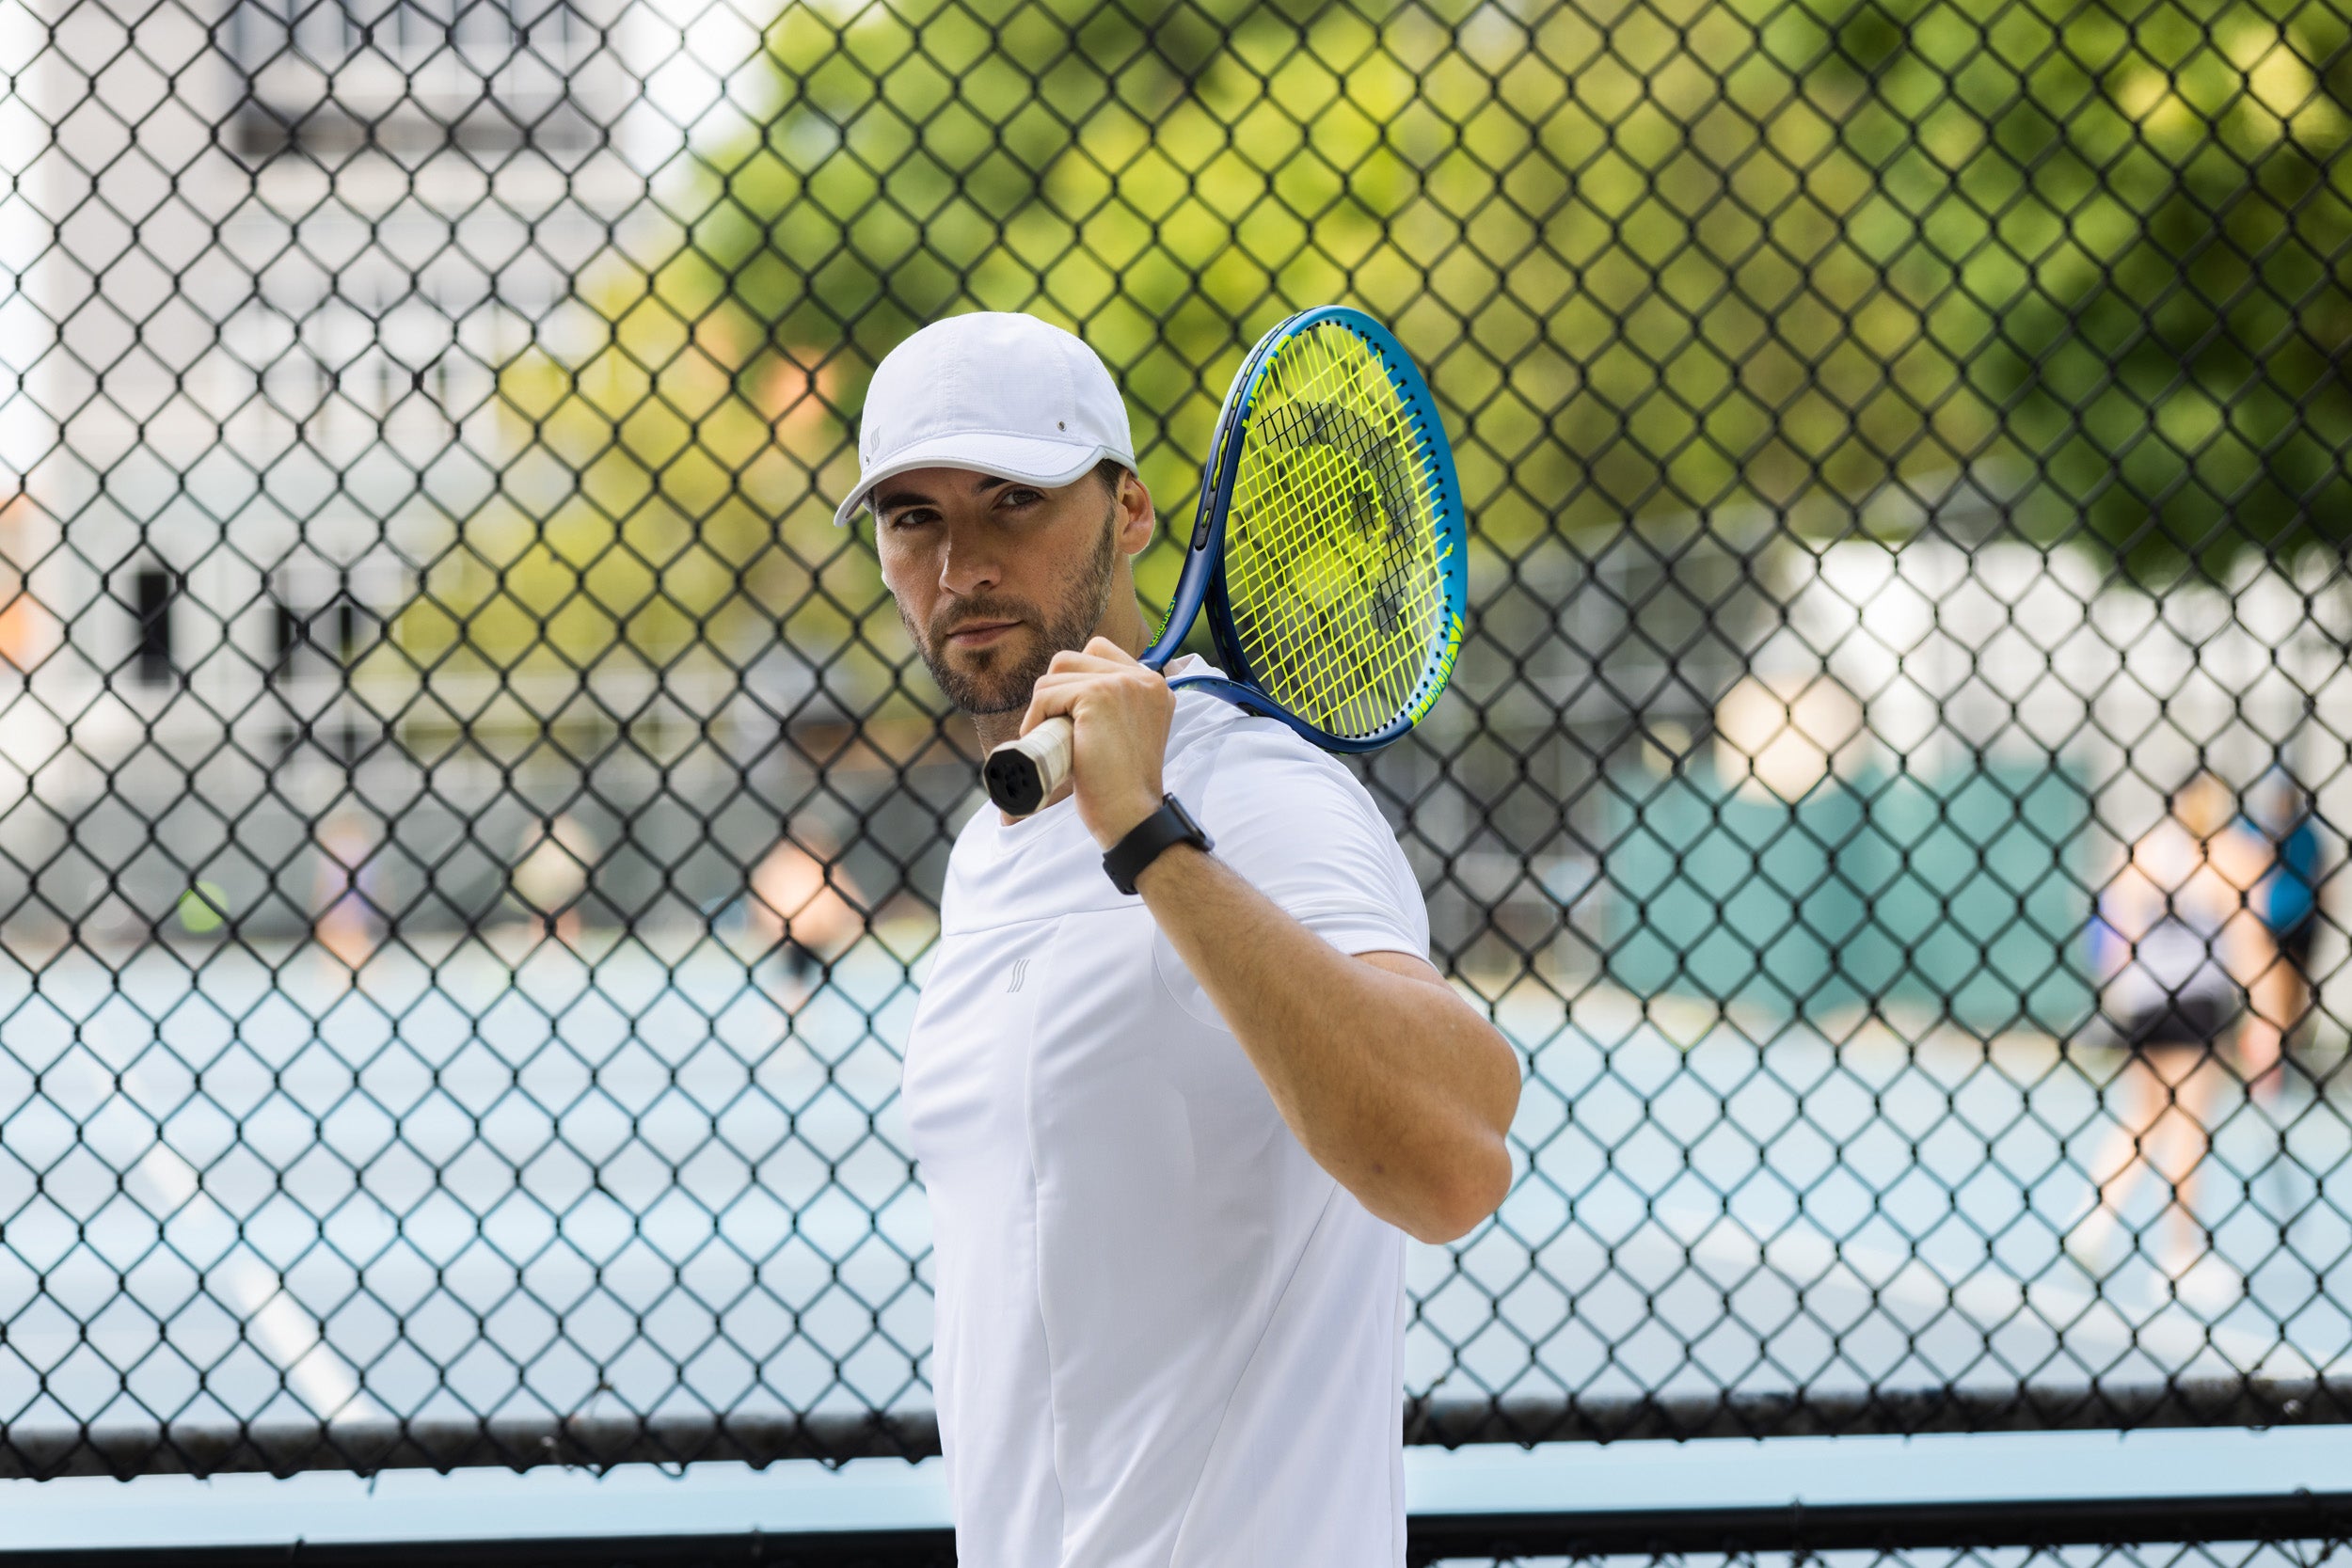 Experience Unbeatable Comfort with SAAKA's All Sports Hat for Tennis and Pickleball